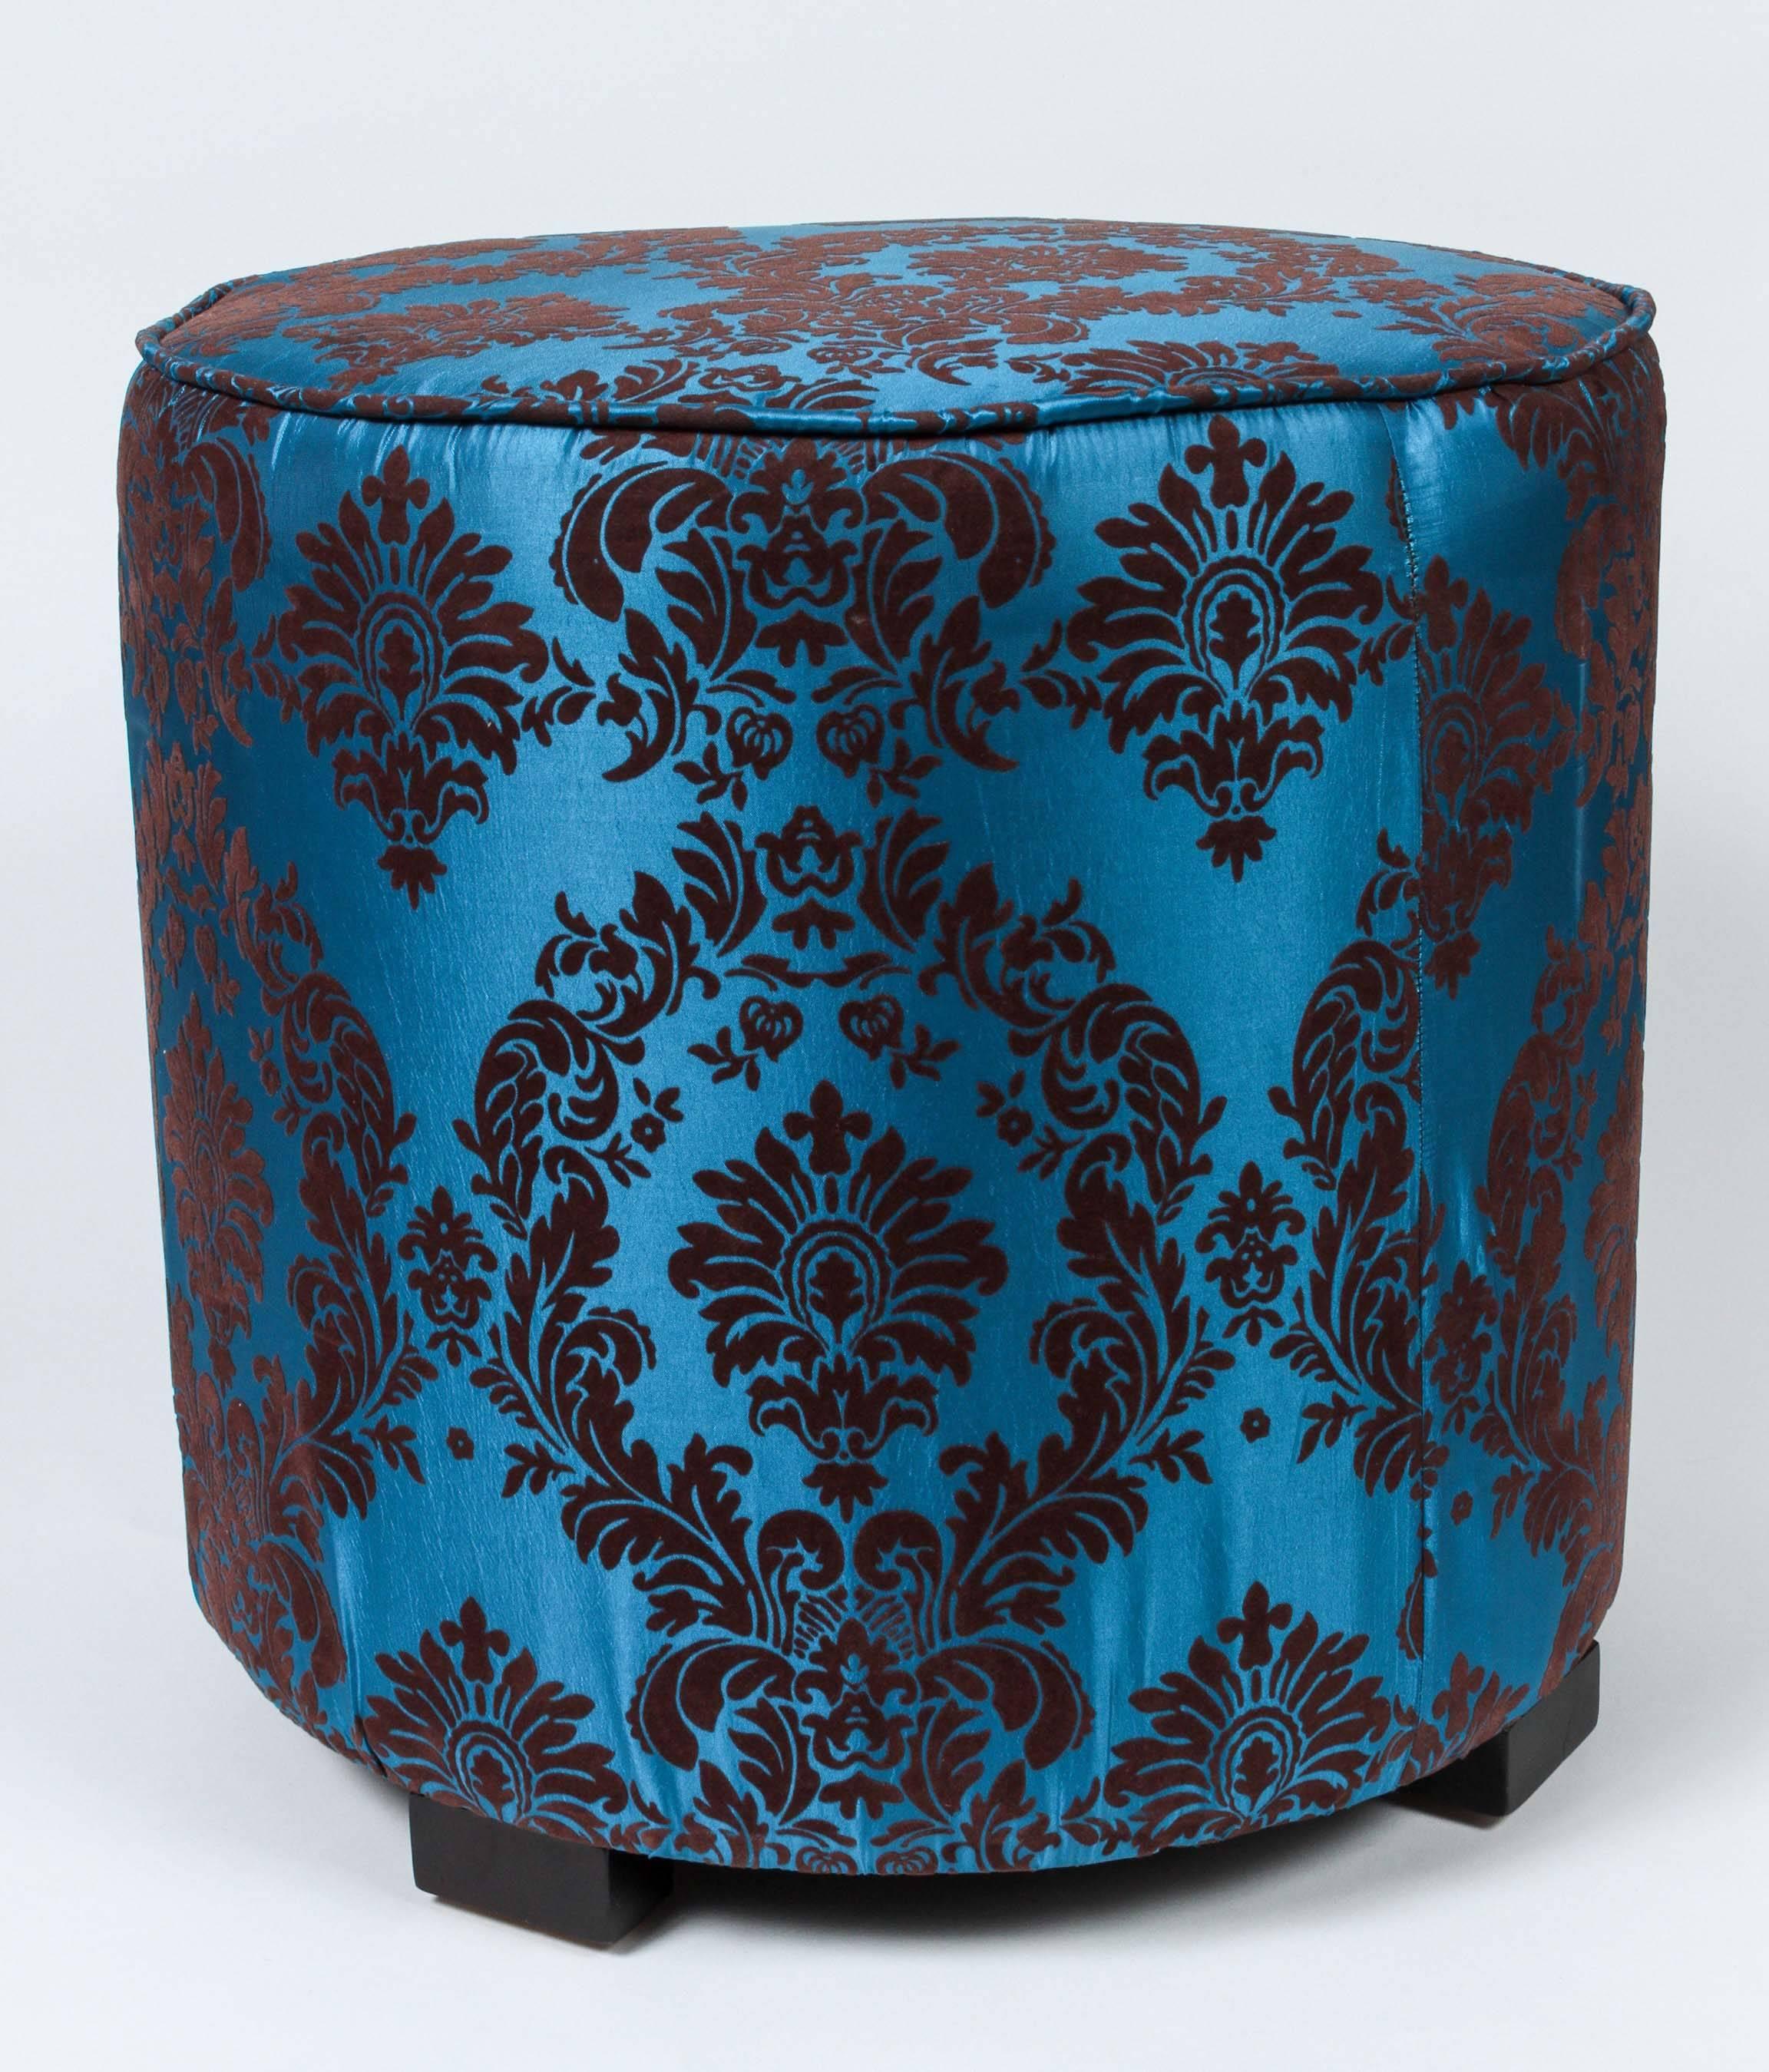 Pair of modern Contemporary round Moroccan style stool in blue and brown fabric upholstery in 1970s style.
Moroccan little pouf hassock, upholstered footstool or modern circular ottoman.
This versatile accent piece, pouf is designed primarily for